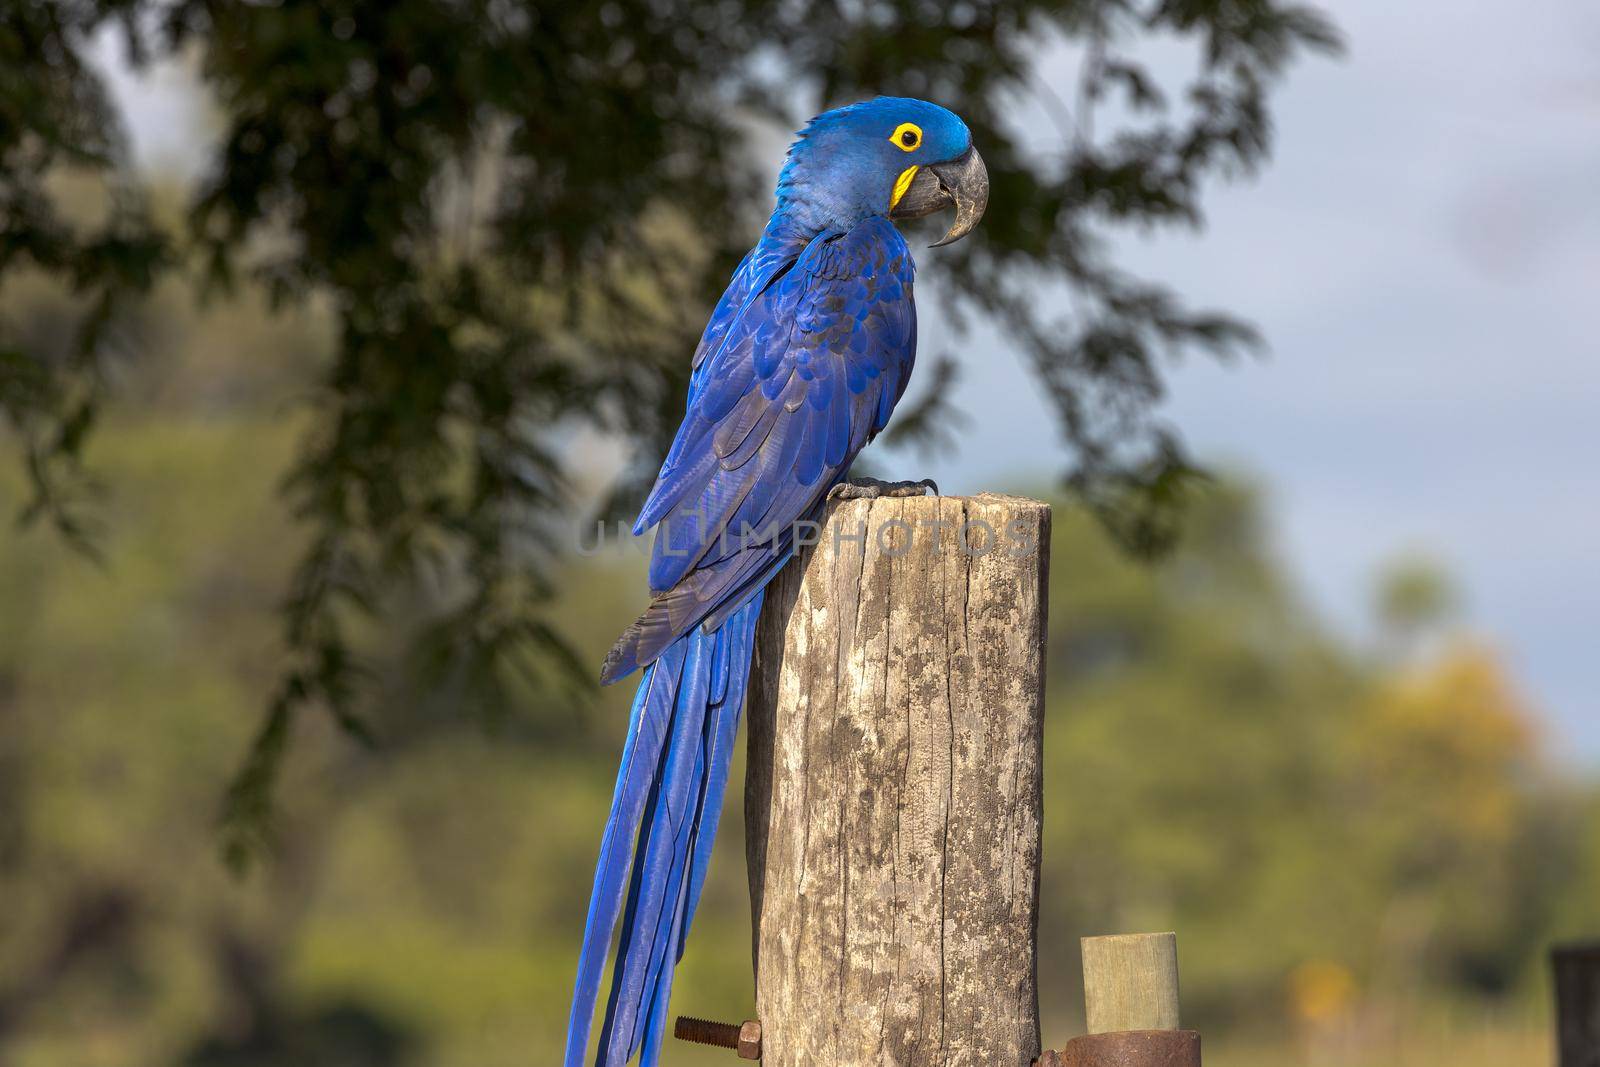 A bright blue Hyacinth Macaw perched on a fencepost in the Pantanal of Brazil.